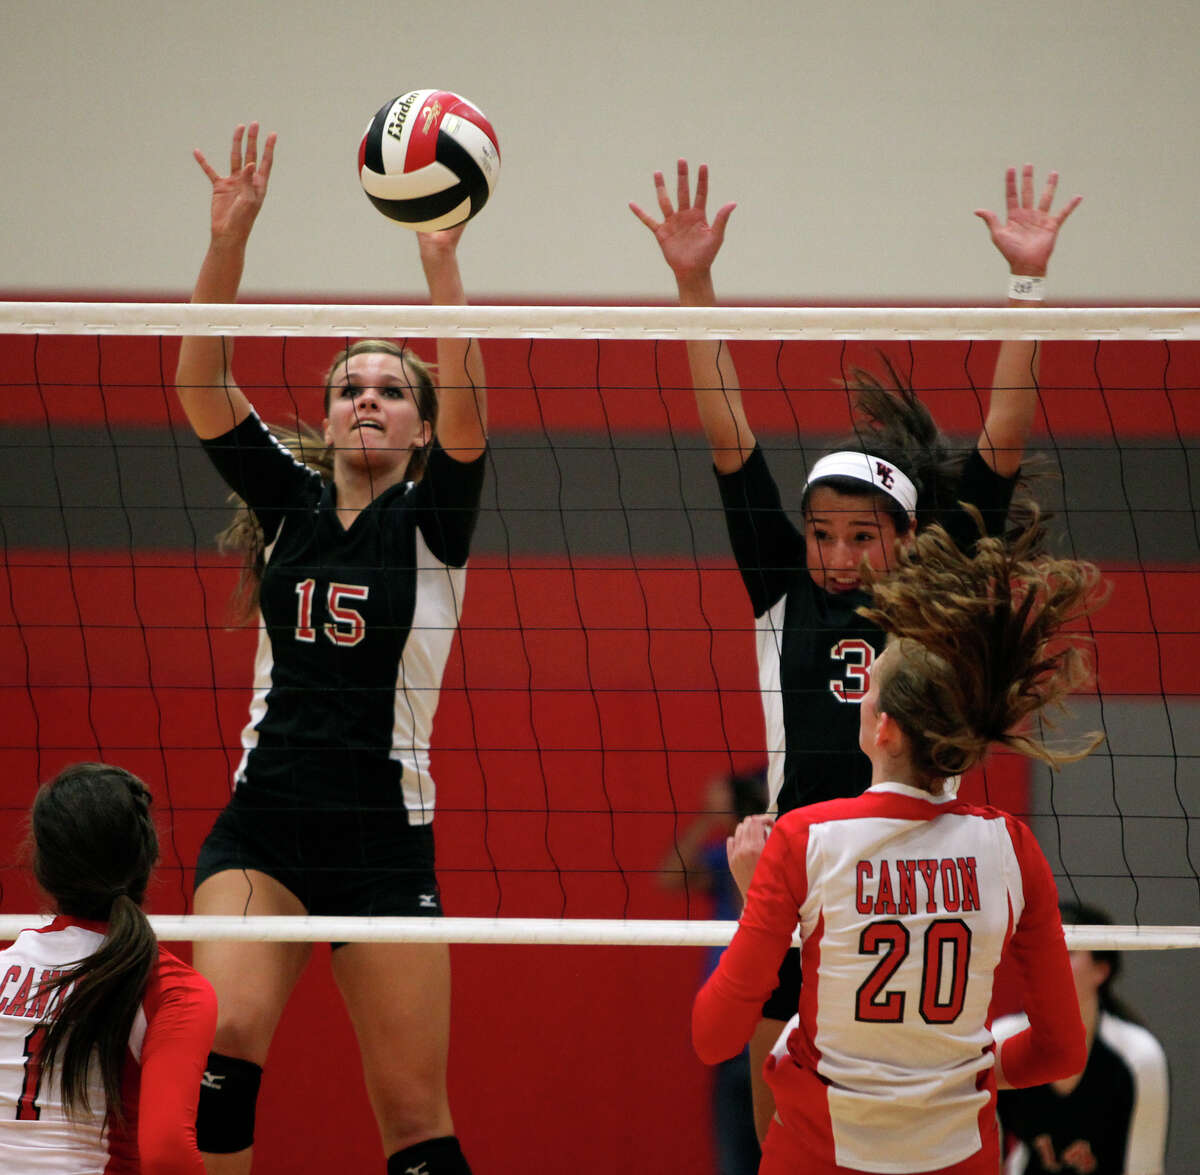 Churchill's Shelby Arnold, left, and Tori Guerra go up against New Braunfels Canyon's Megan Isbell, right, during their Class 5A first round playoff match at Judson High School on Tuesday, Oct. 30, 2012.